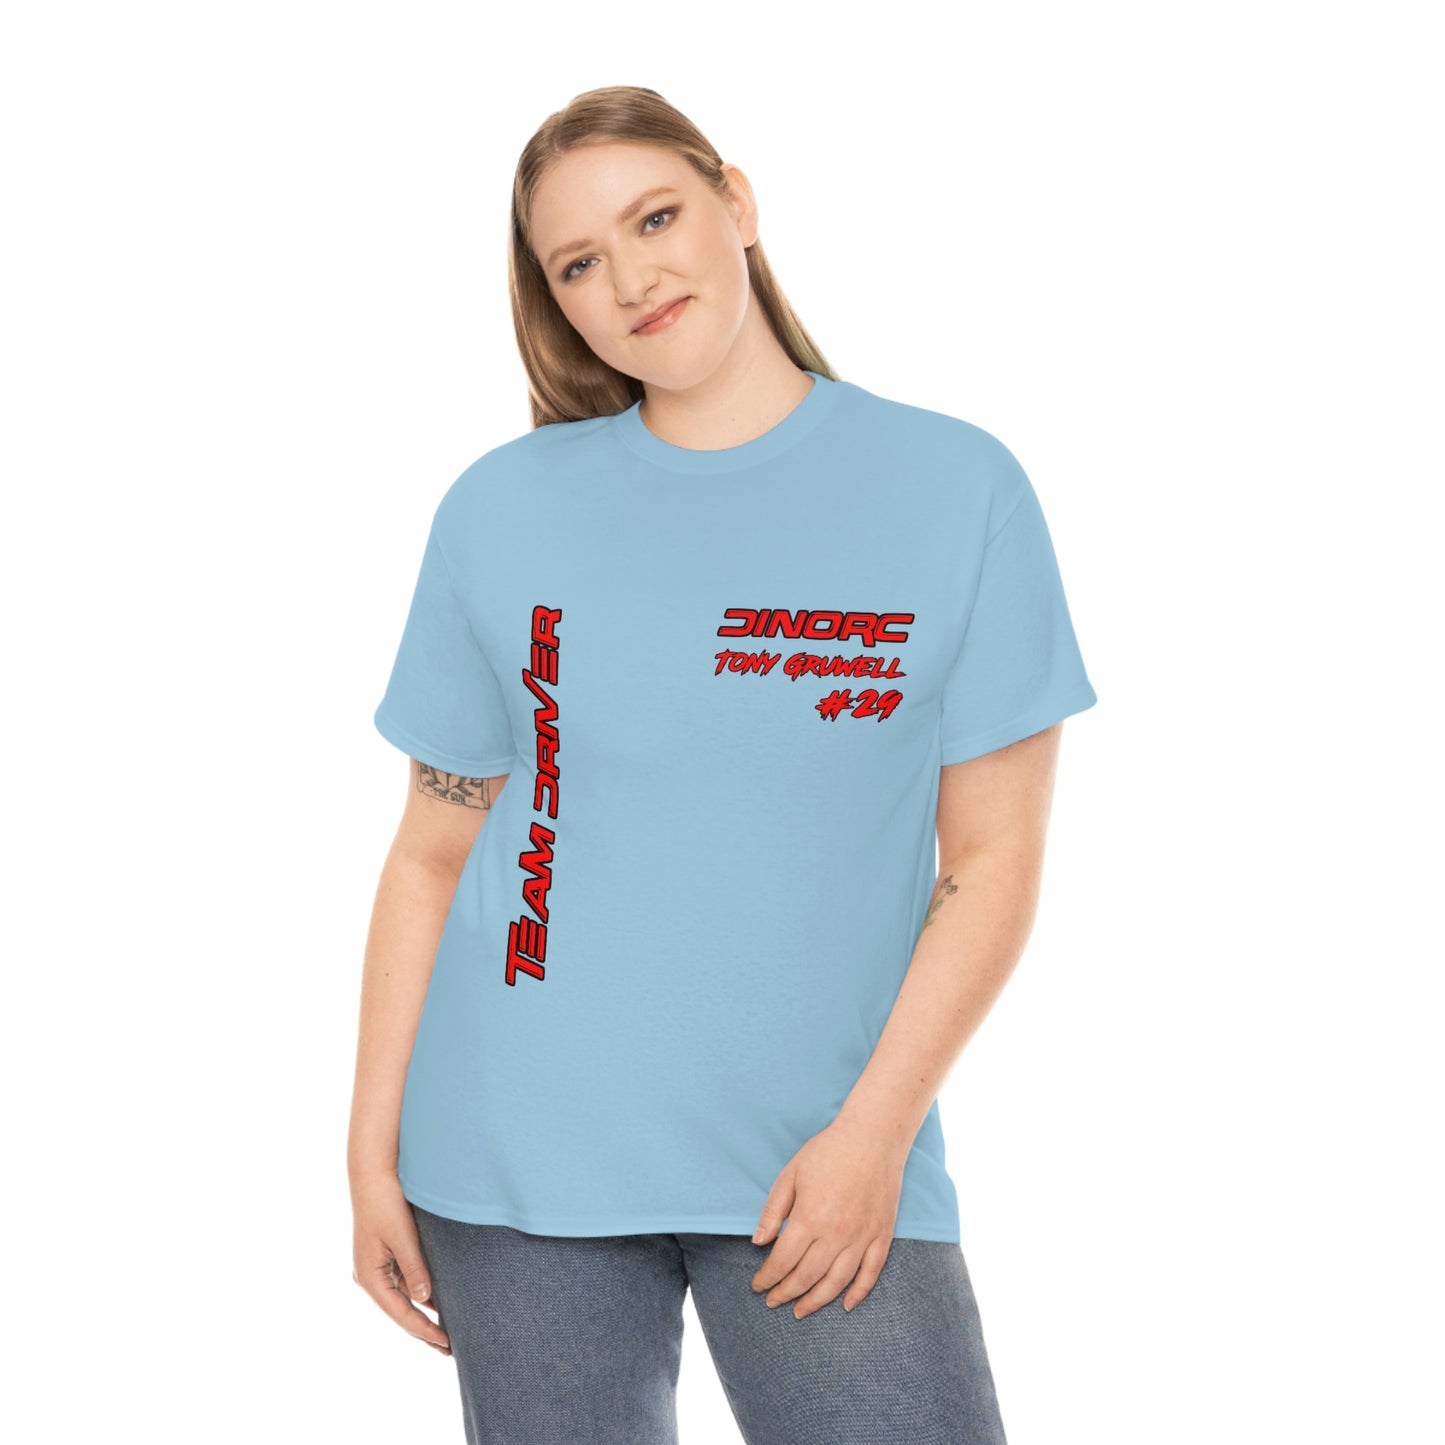 Team Driver Tony Gruwell Front and Back DinoRc Logo T-Shirt S-5x 5 colors